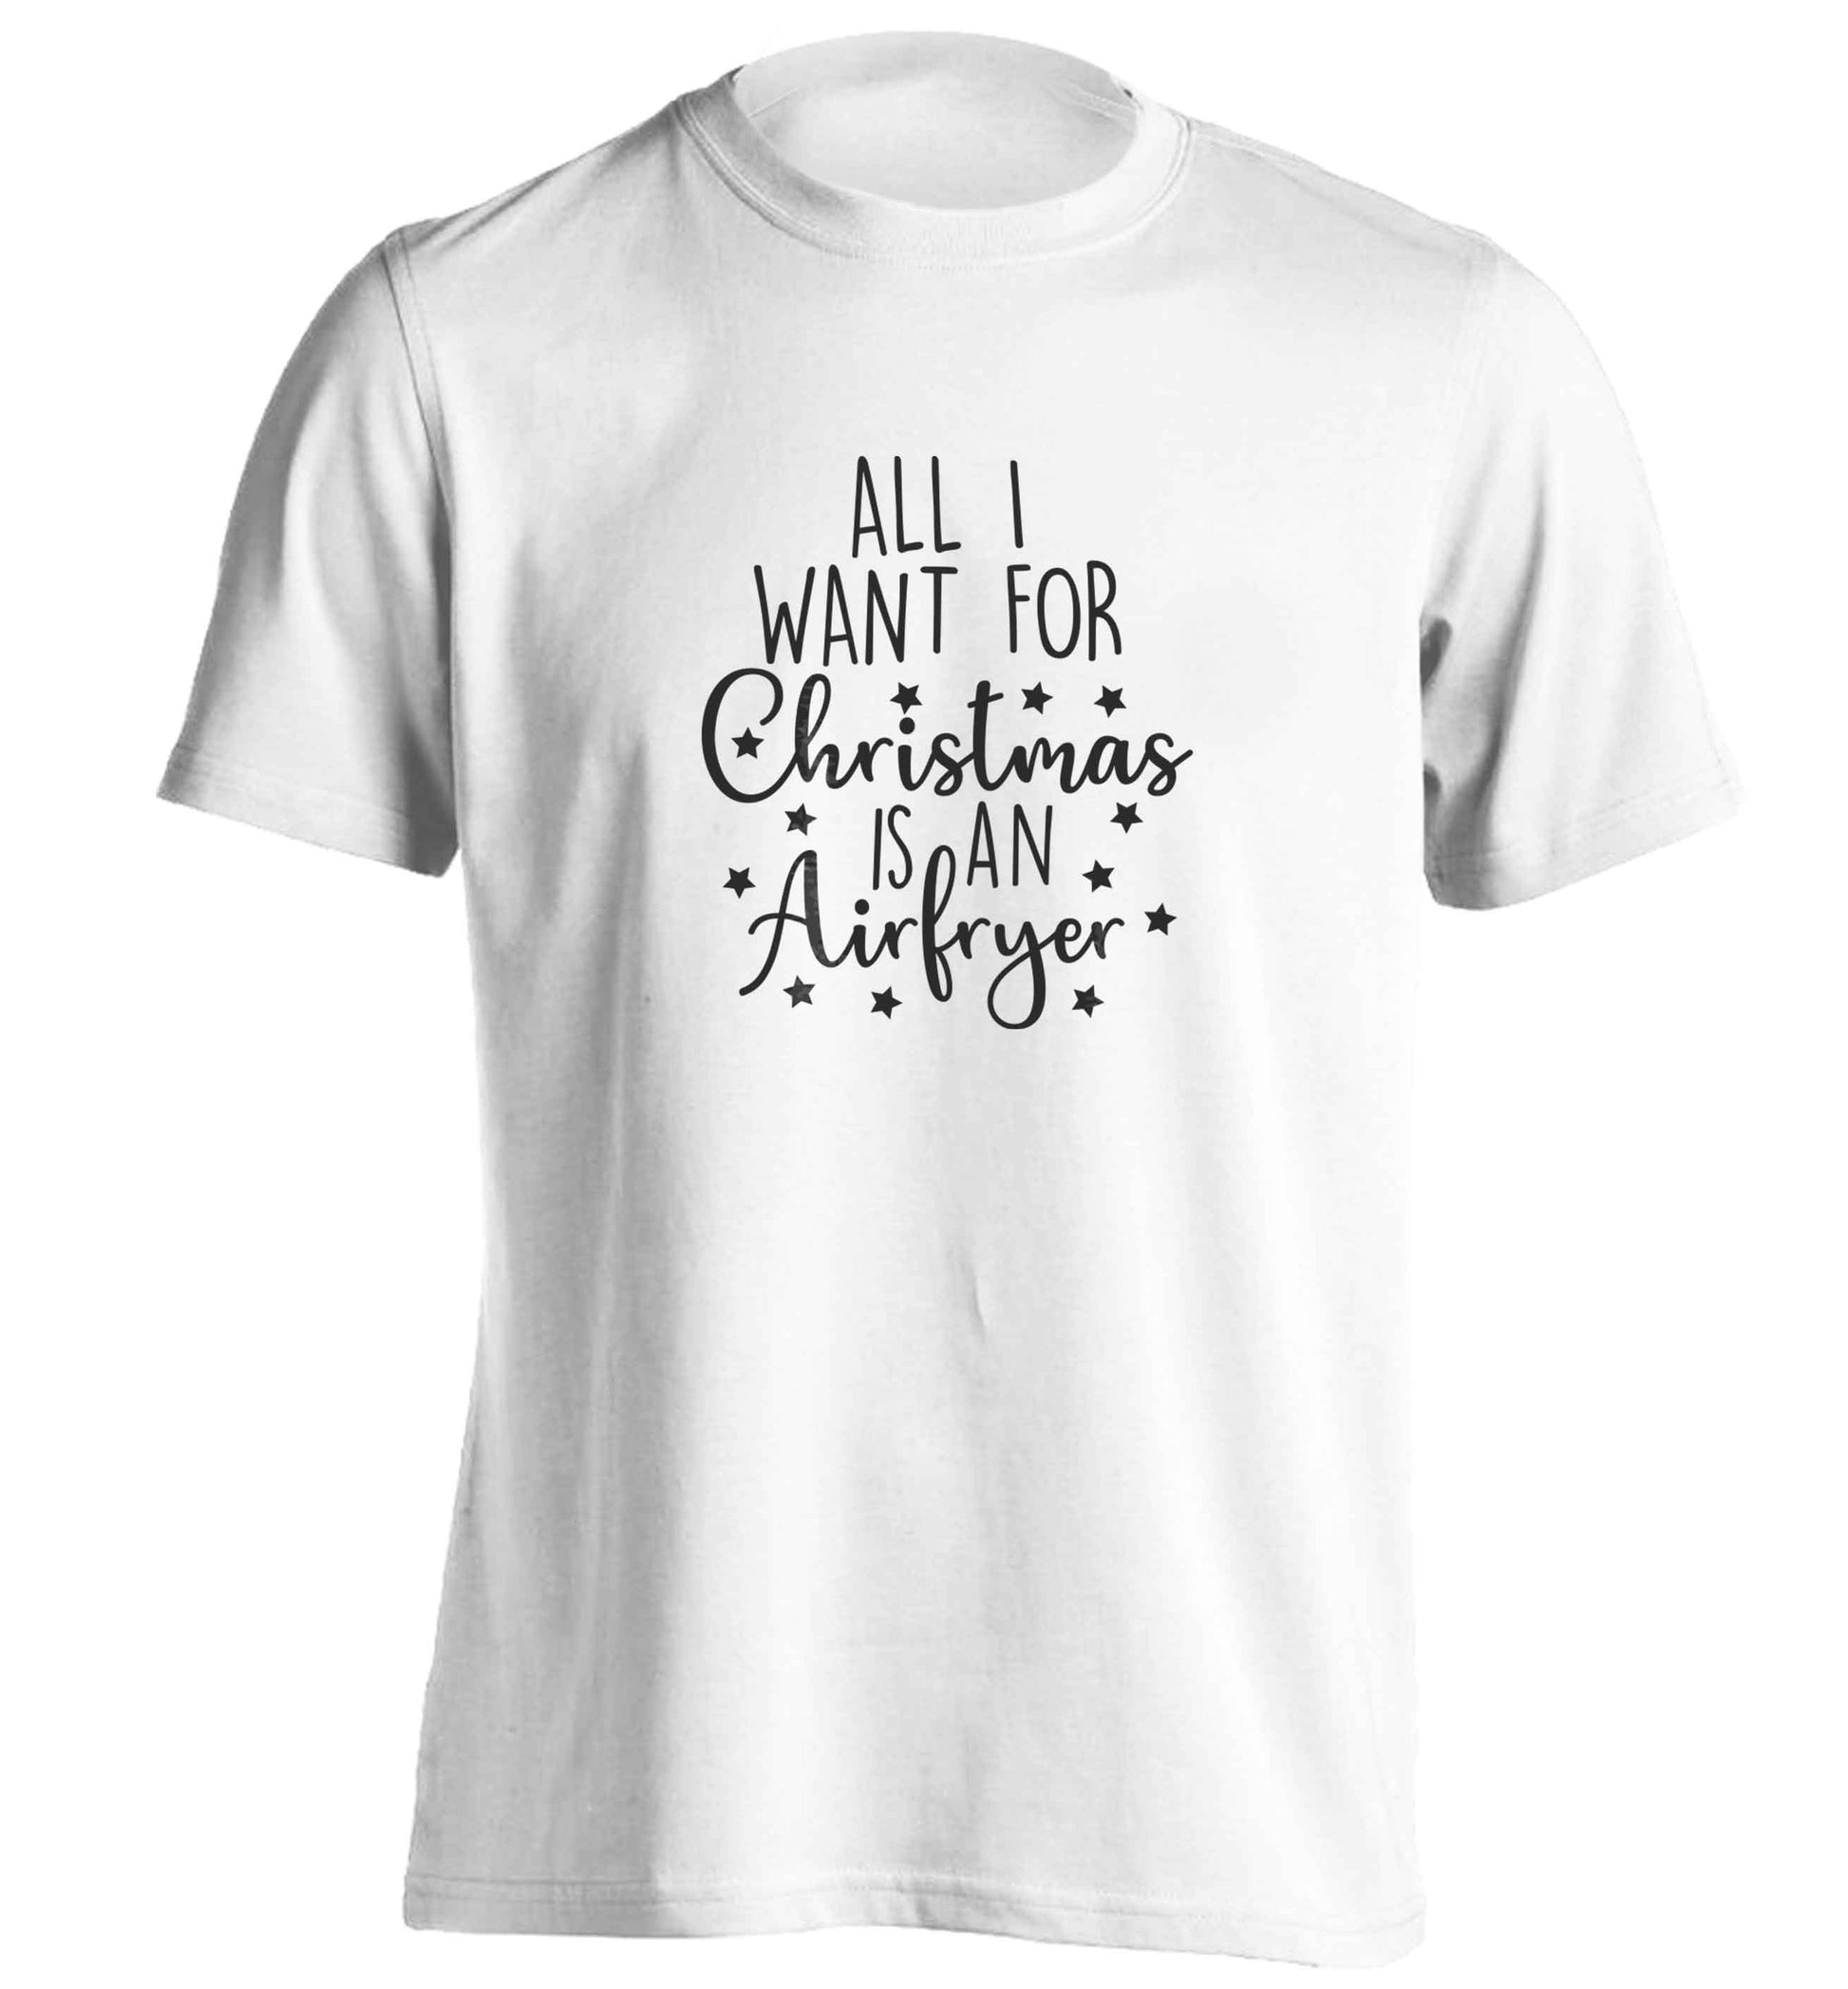 All I want for Christmas is an airfryeradults unisex white Tshirt 2XL